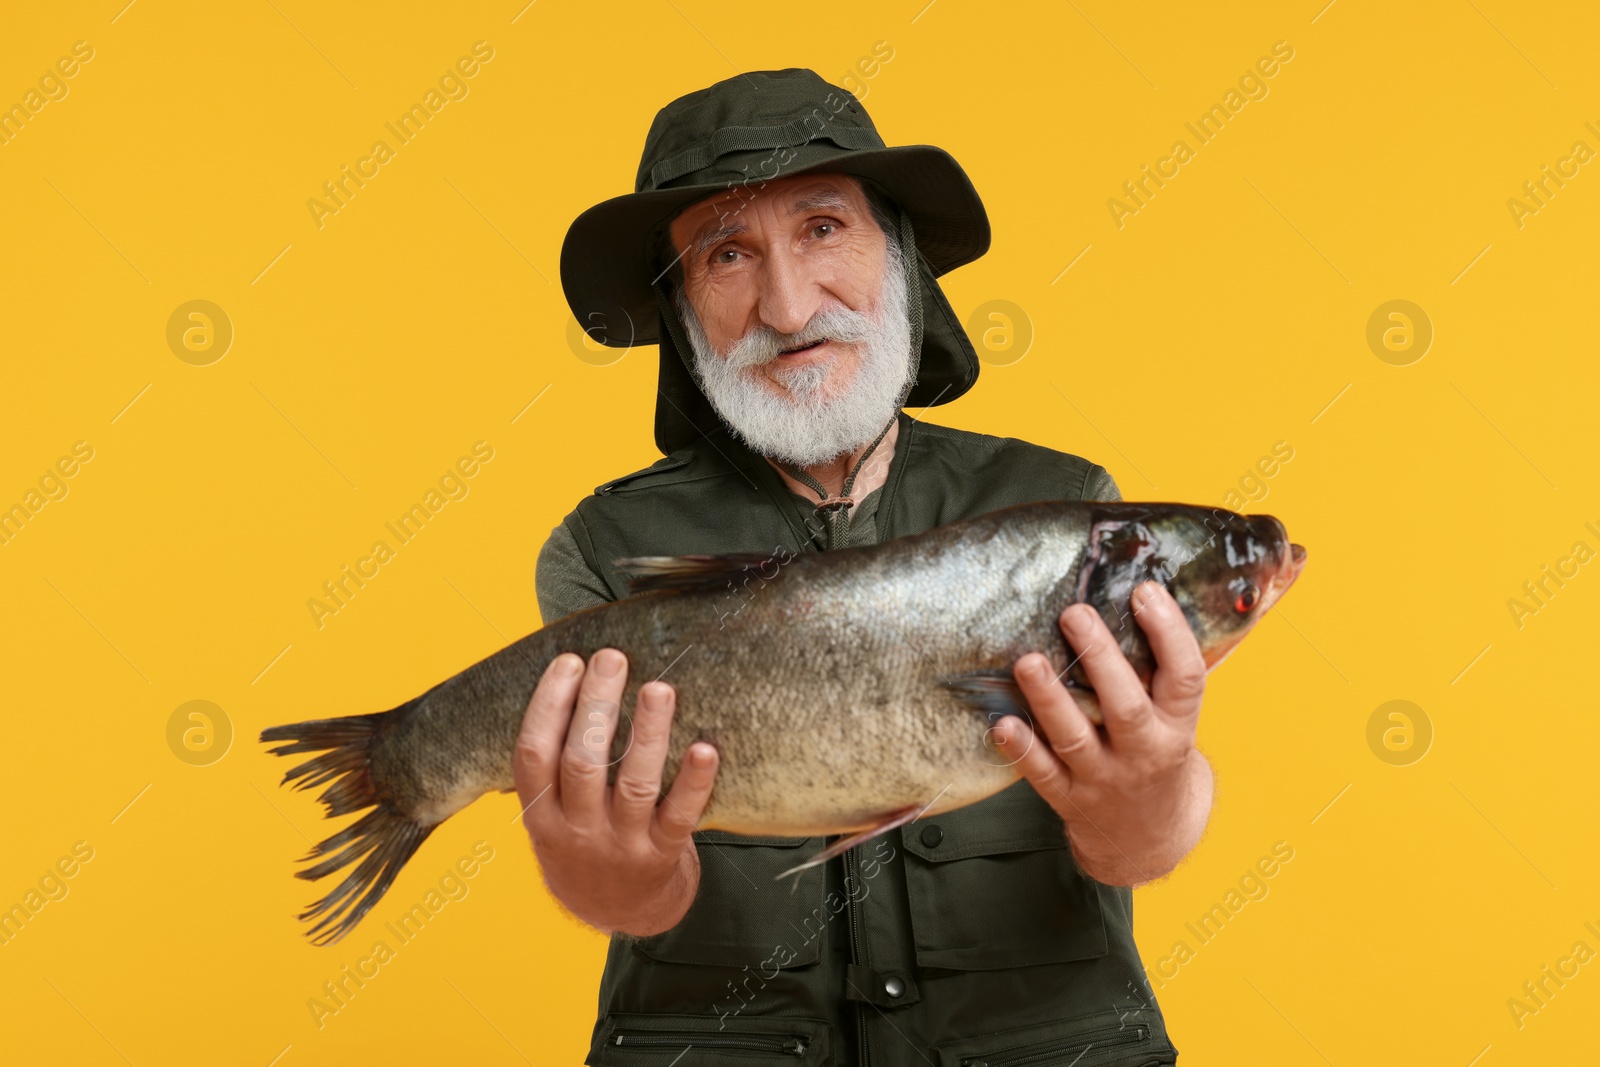 Photo of Fisherman with caught fish on yellow background